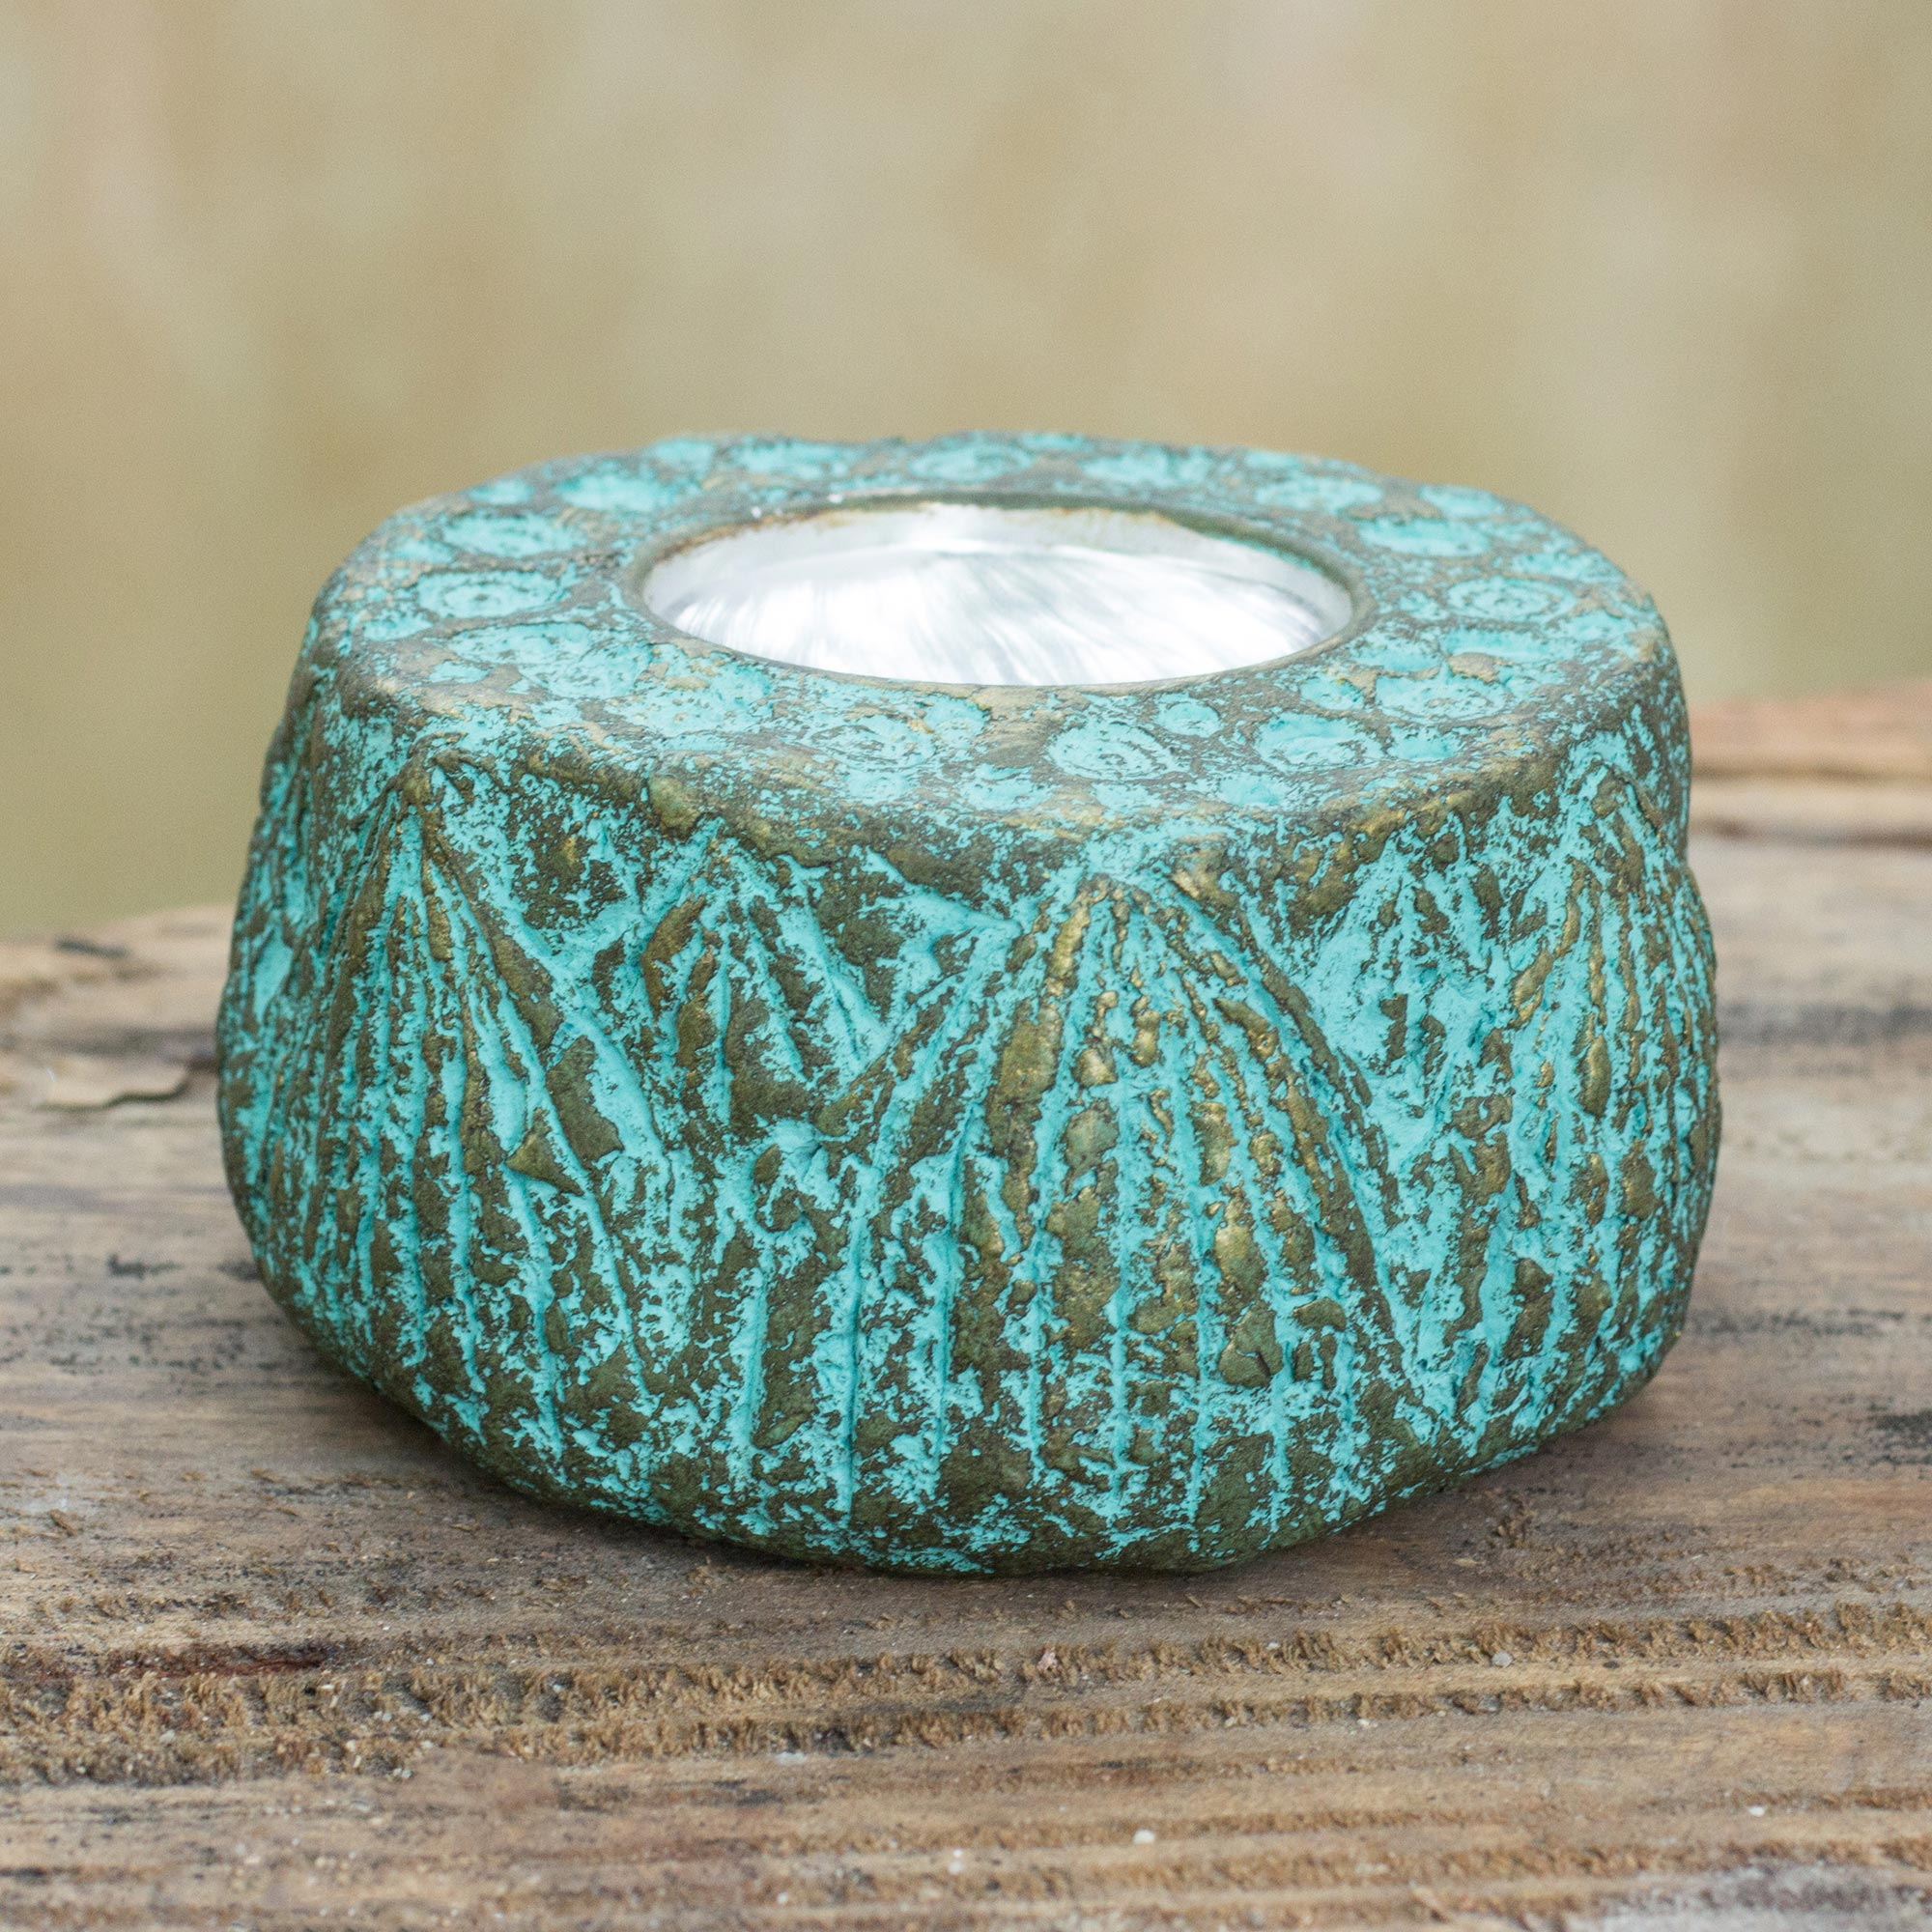 Artisan Crafted Recycled Paper Tealight Candleholder, "Lotus Throne"